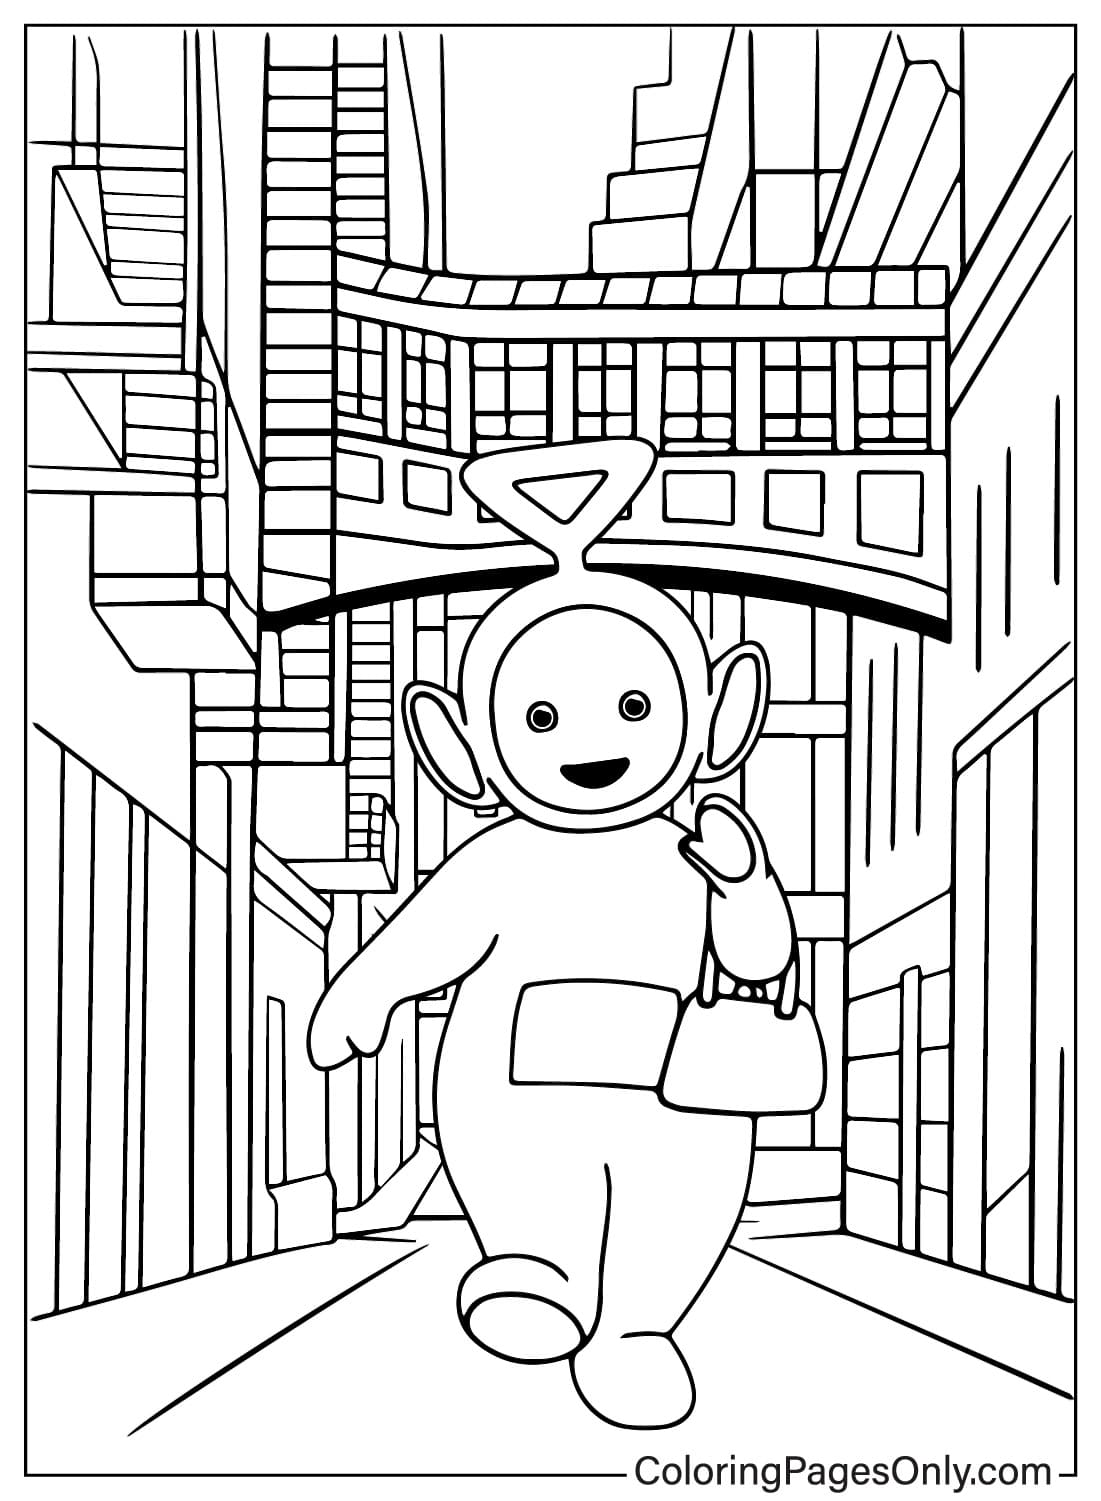 Coloring Page Tinky-Winky from Teletubbies - WildBrain